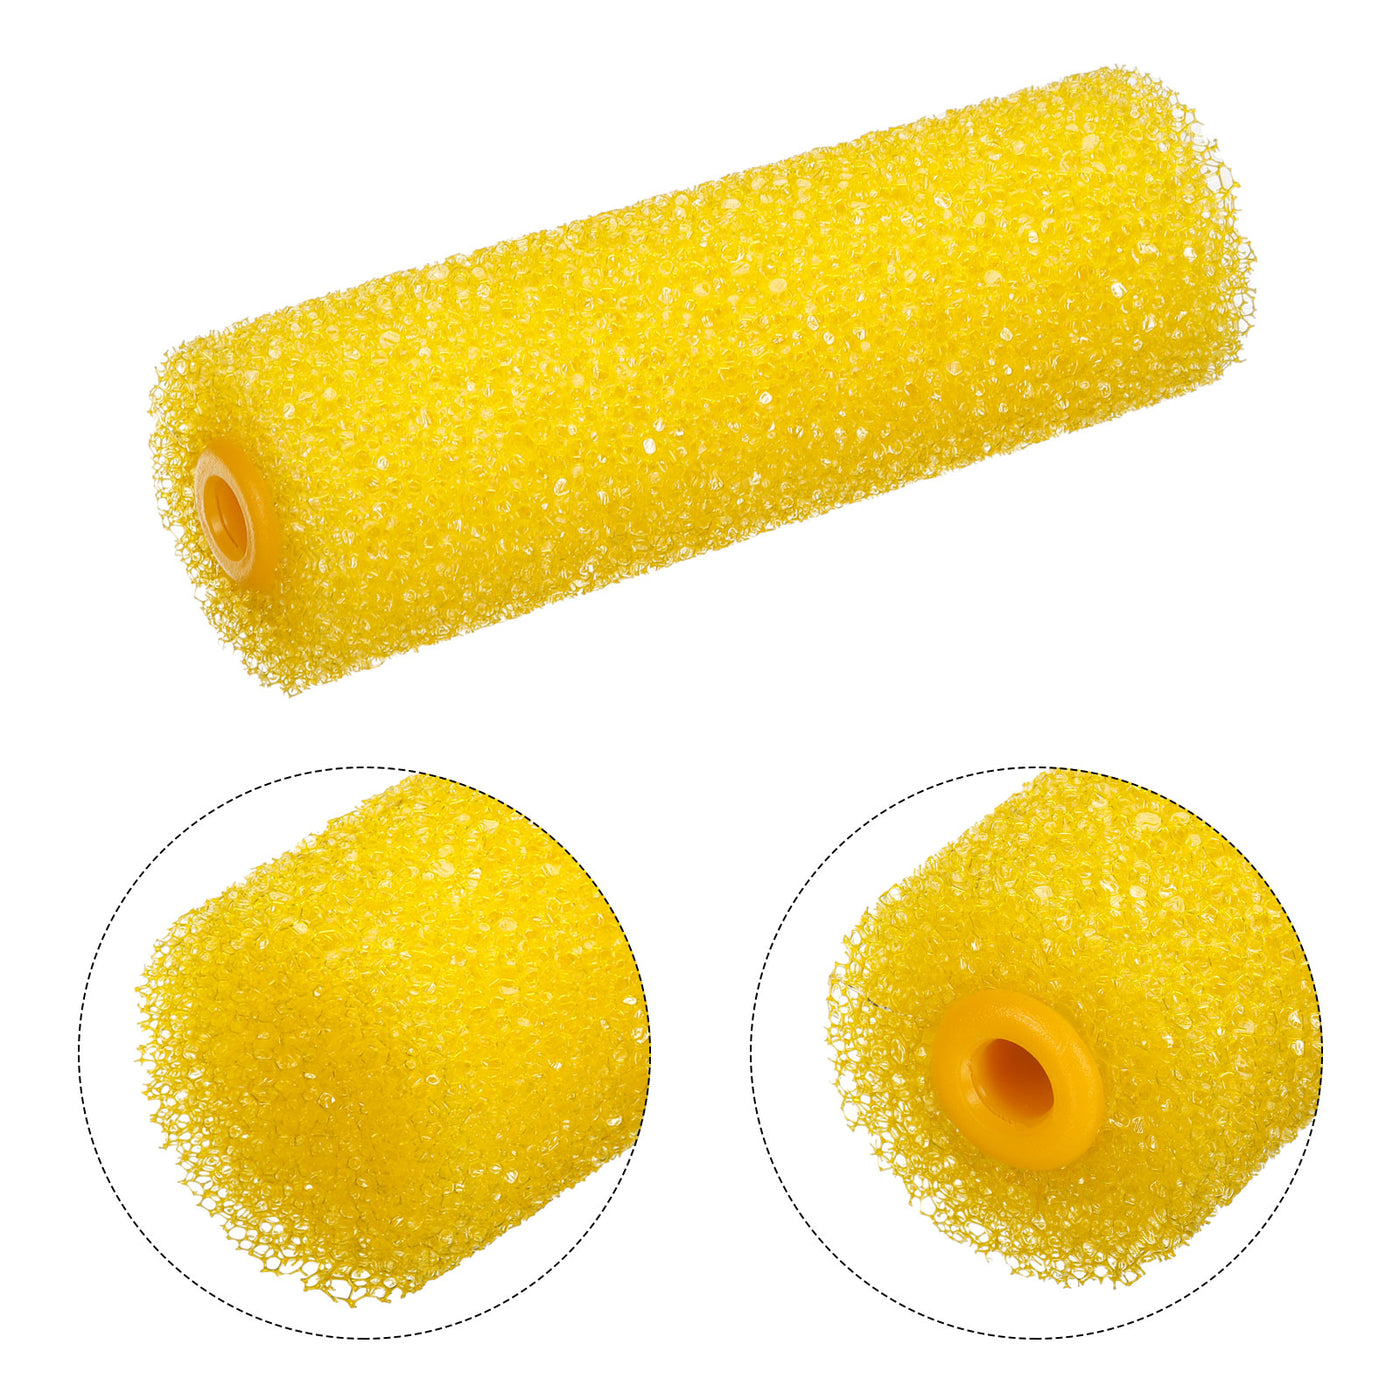 uxcell Uxcell 3Pcs Paint Roller Kit, 2Pcs 4" Sponge Roller Covers and 10" Length Roller Frame